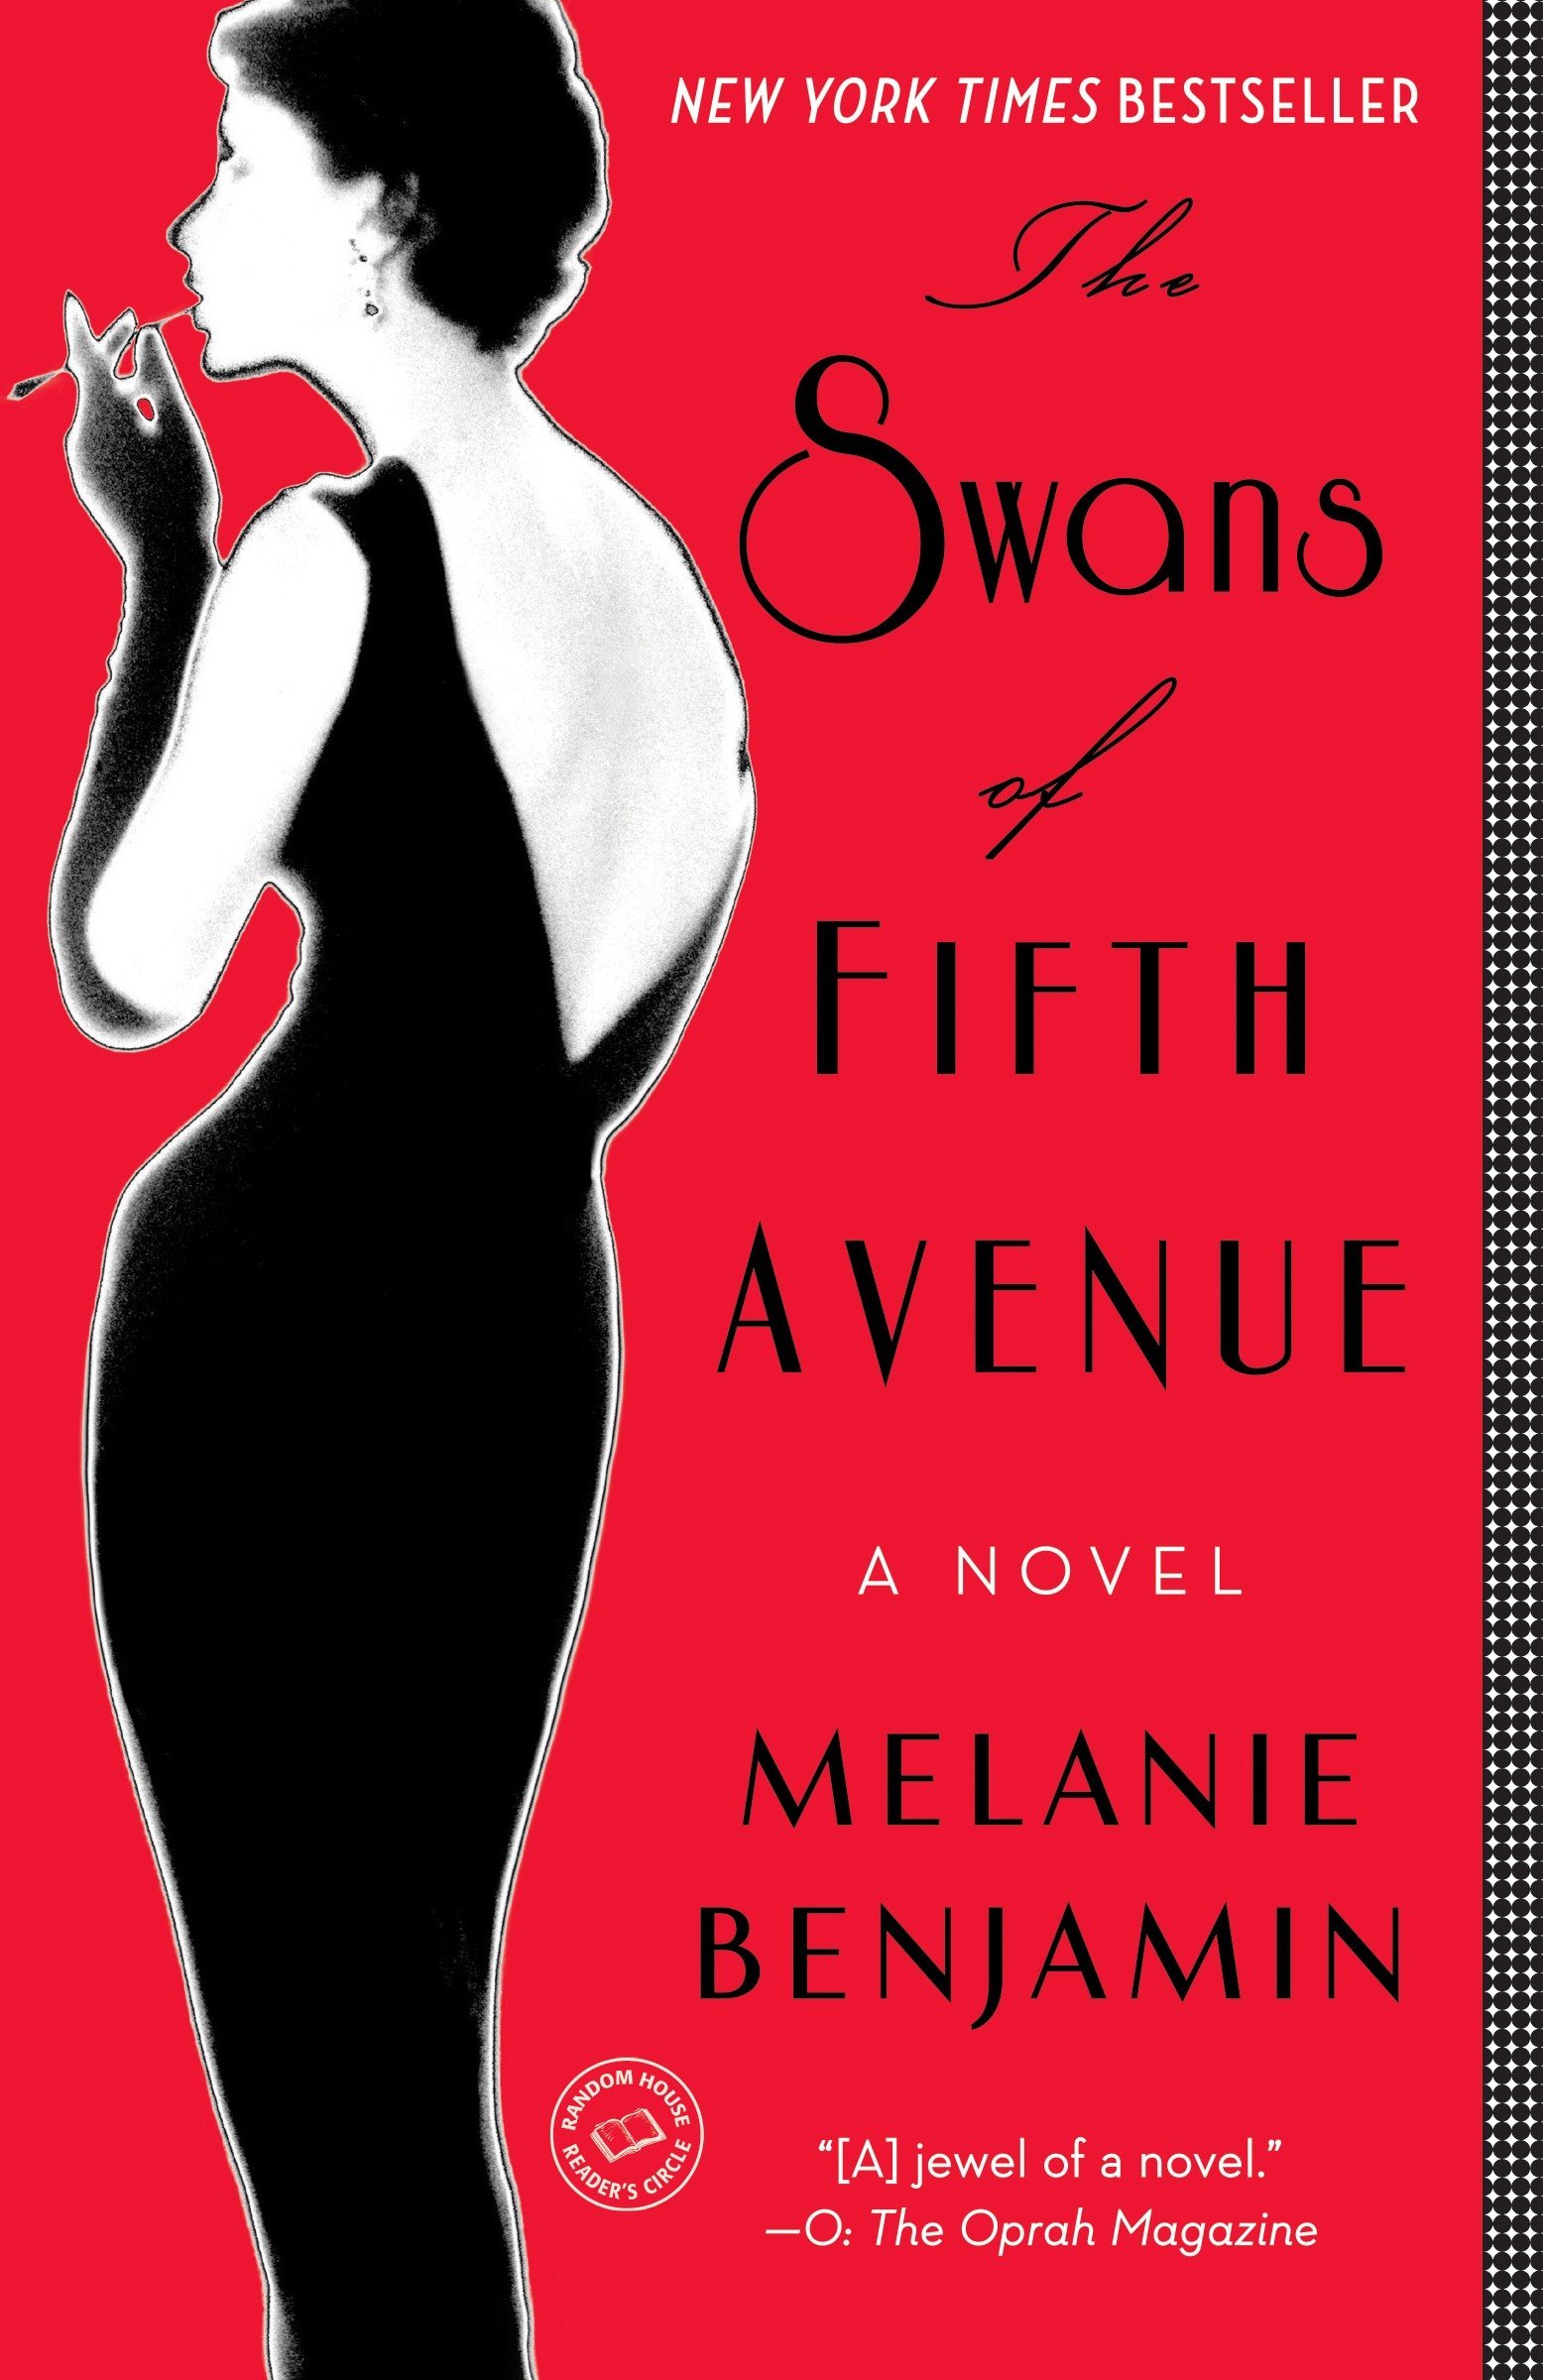 The Swans of Fifth Avenue: A Novel